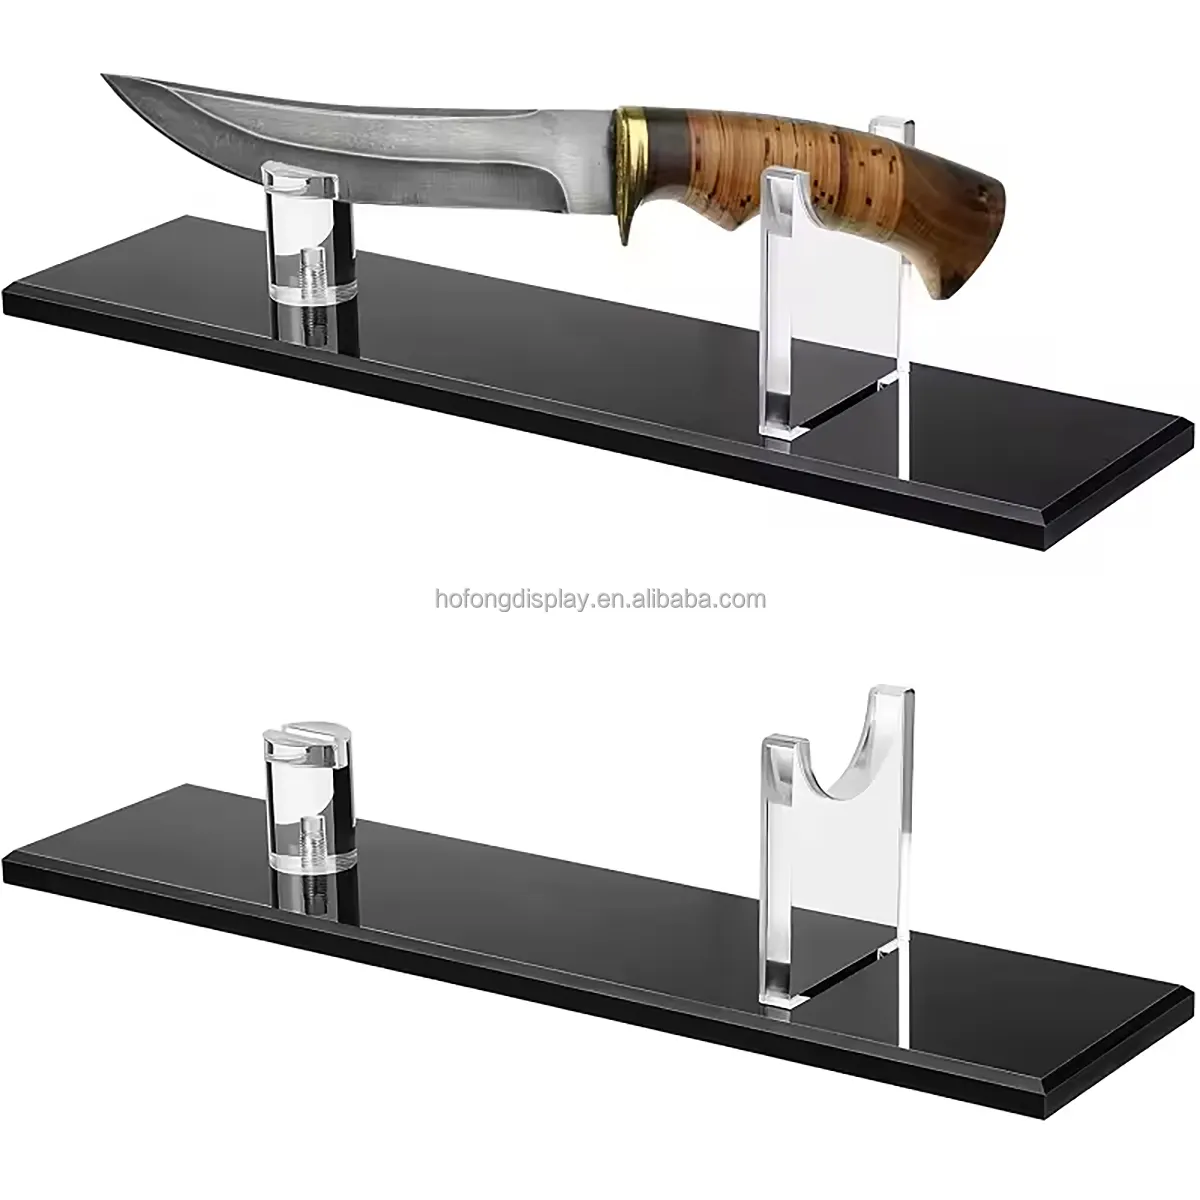 Acrylic Knife Display Stand Fixed Blade Knife Collection Display Stand Holder for Single Knife Rustic Cabin Home Decor